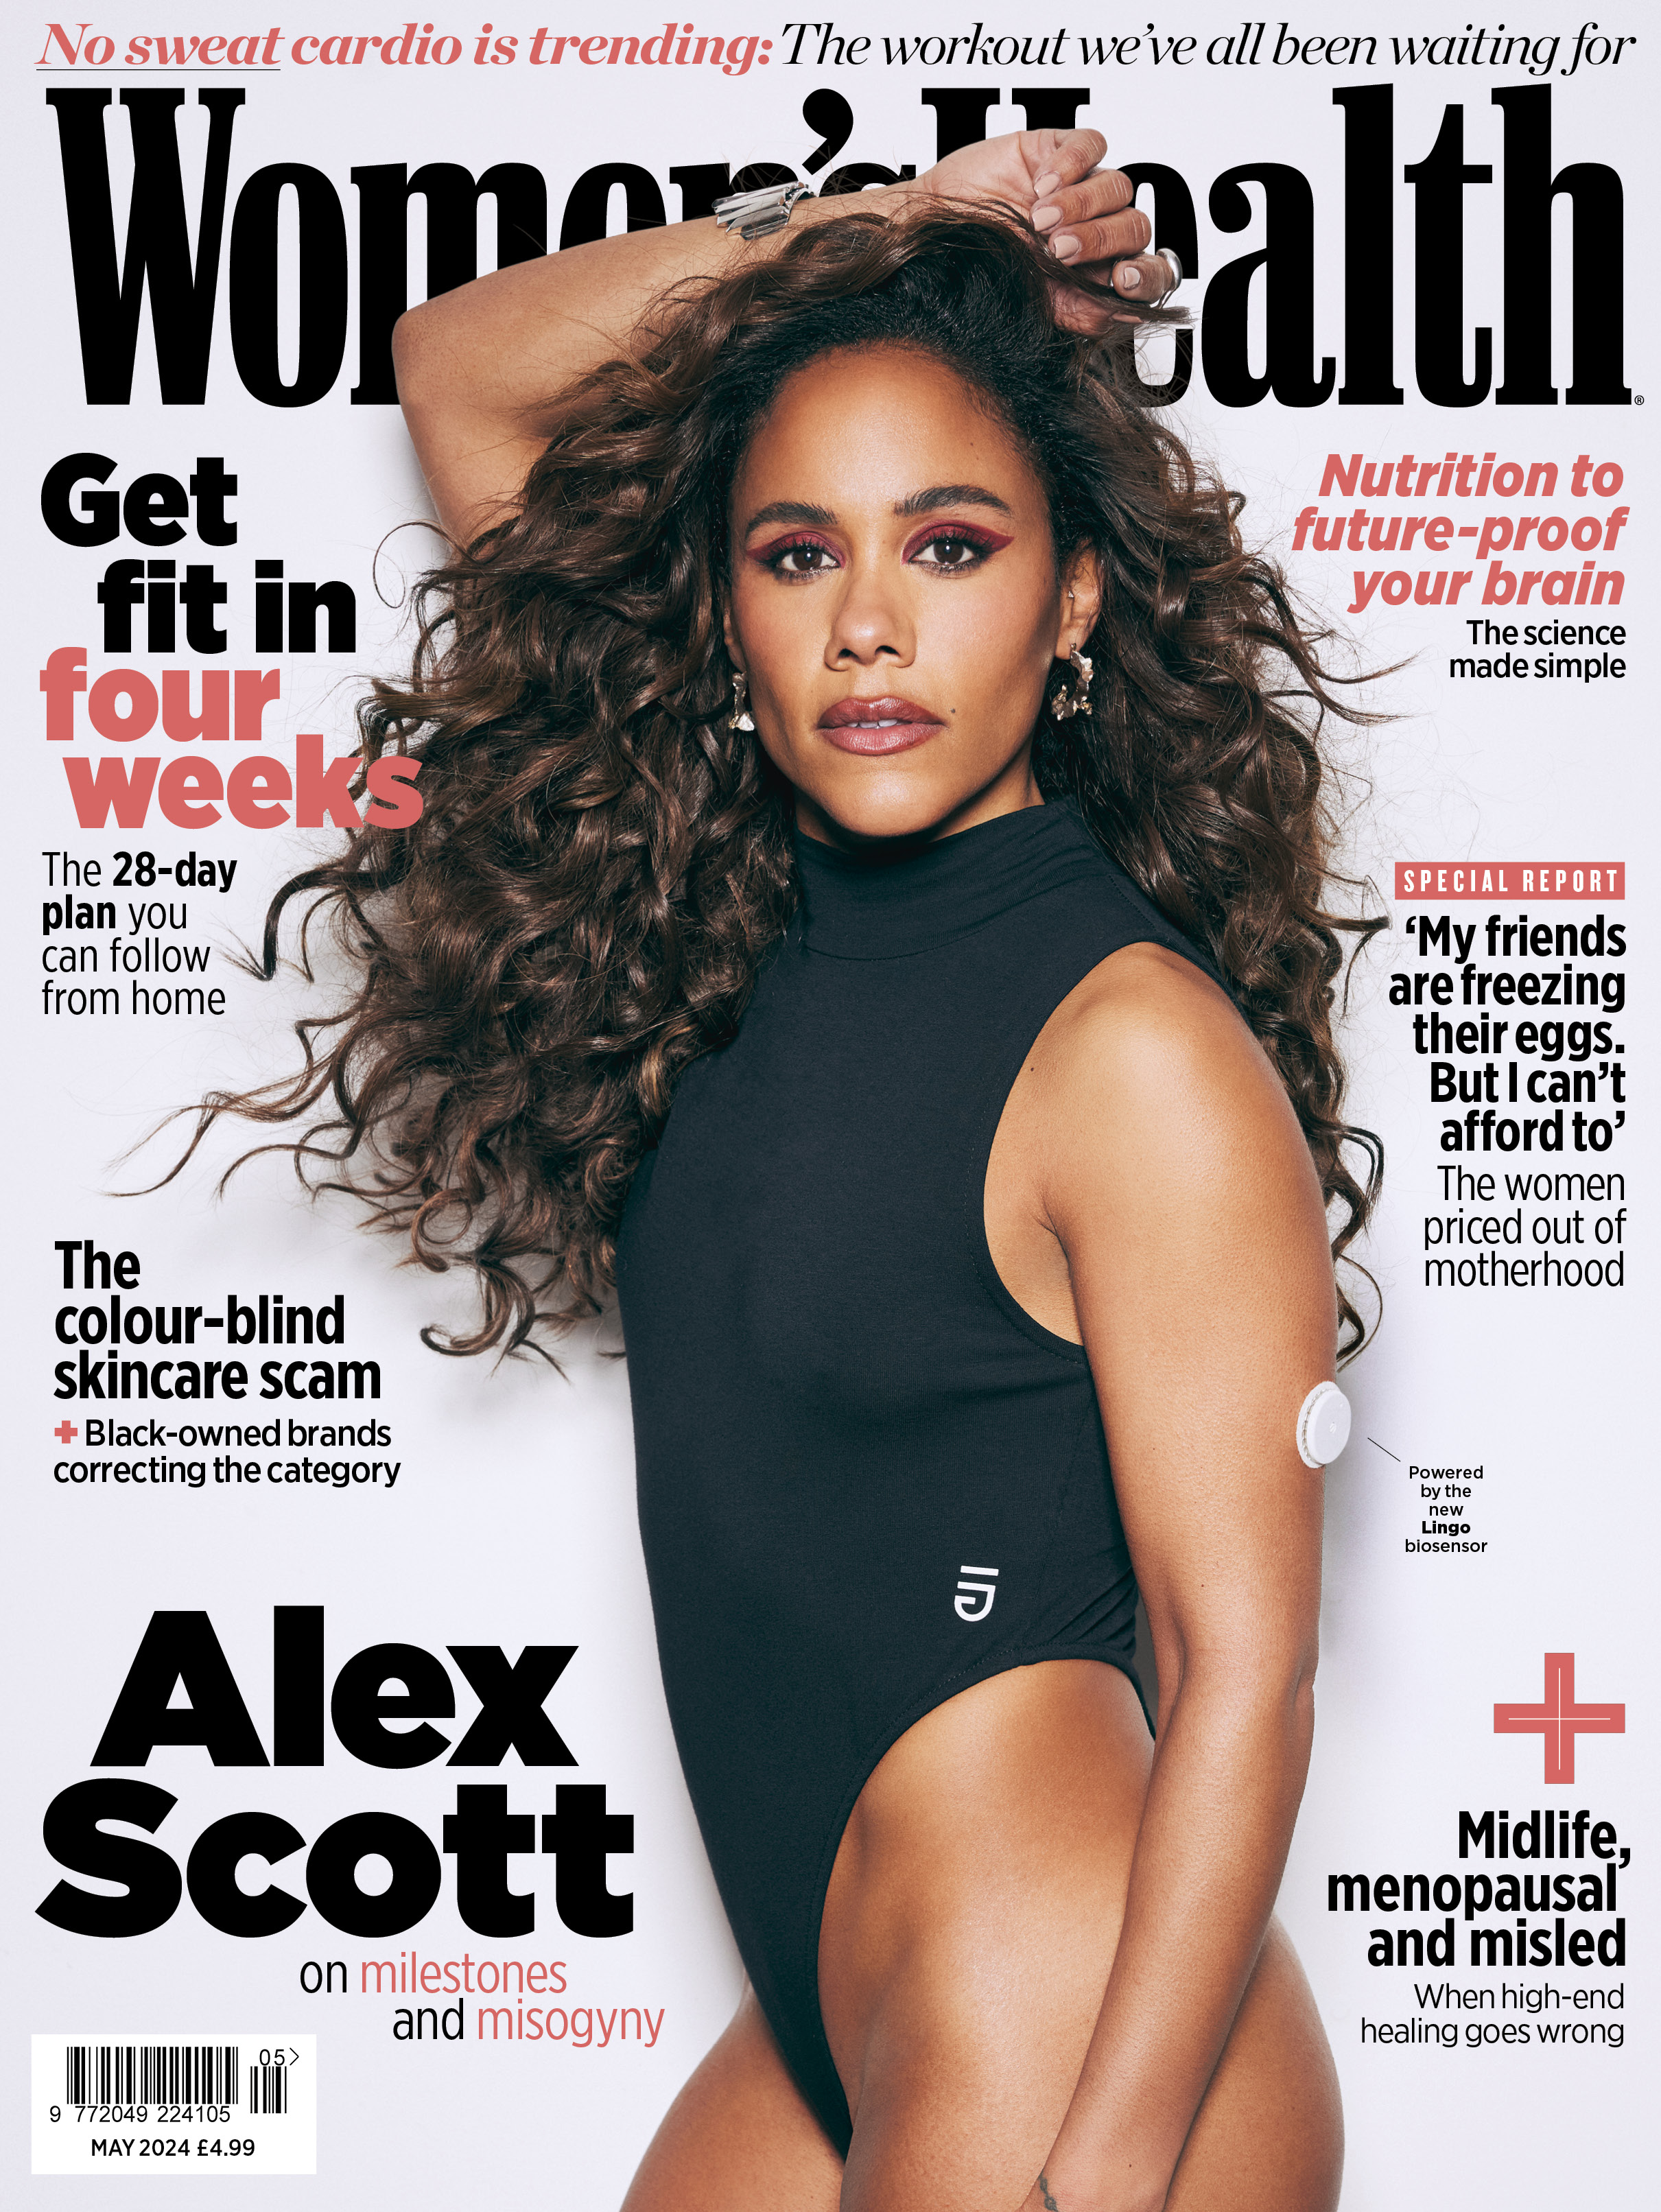 Women’s Health UK May front cover with all editorial, crediting: ‘Mark Cant / Women’s Health UK’. 